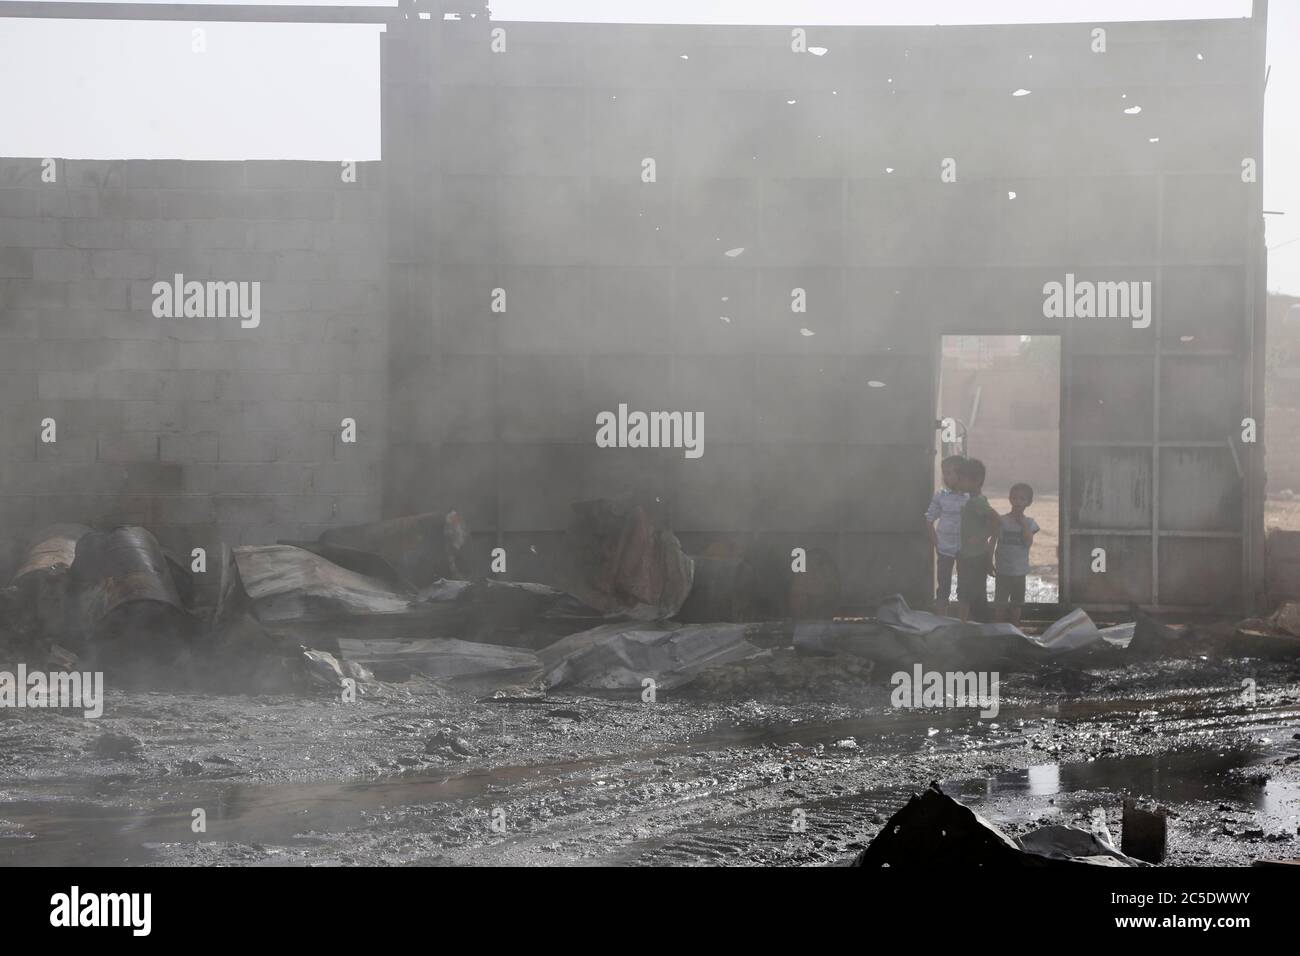 Sanaa, Yemen. 2nd July, 2020. Children look at a warehouse after it was hit by airstrikes in Sanaa, Yemen, on July 2, 2020. The Saudi-led coalition on Wednesday launched a series of airstrikes on the Yemeni capital Sanaa, which is under Houthi control, the Houthi-run al-Masirah TV reported. Credit: Mohammed Mohammed/Xinhua/Alamy Live News Stock Photo